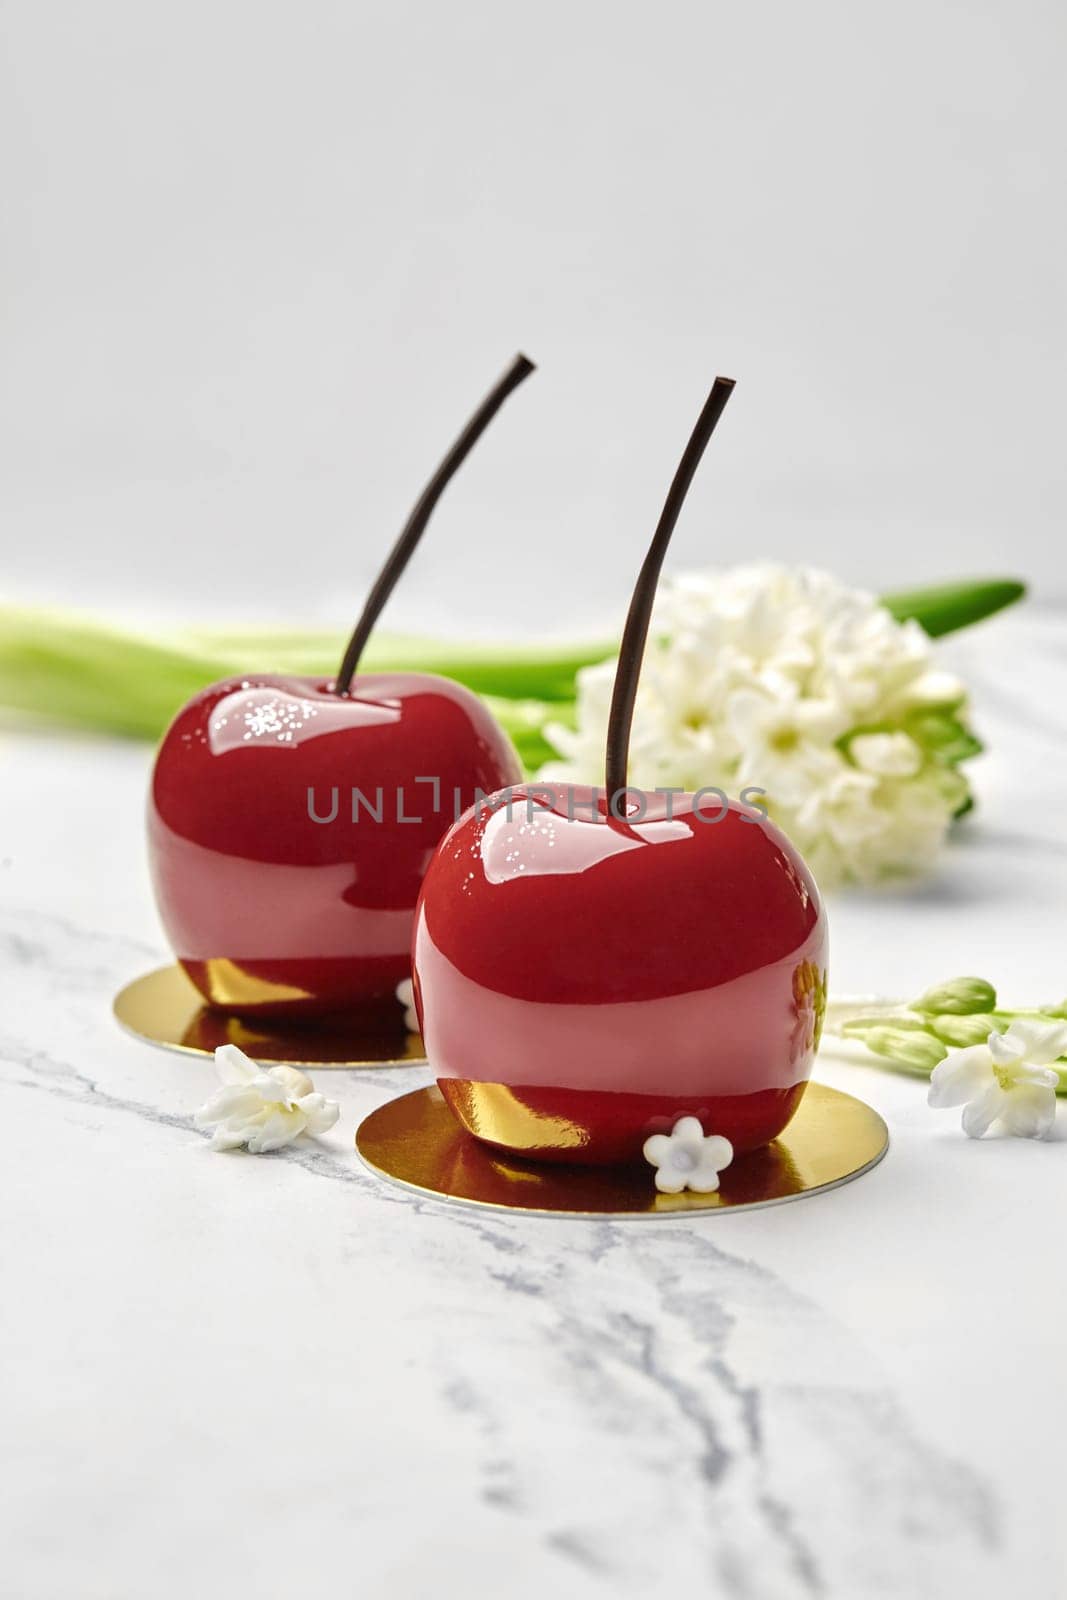 Two red cherry-shaped pastries with sprig of white flowers by nazarovsergey